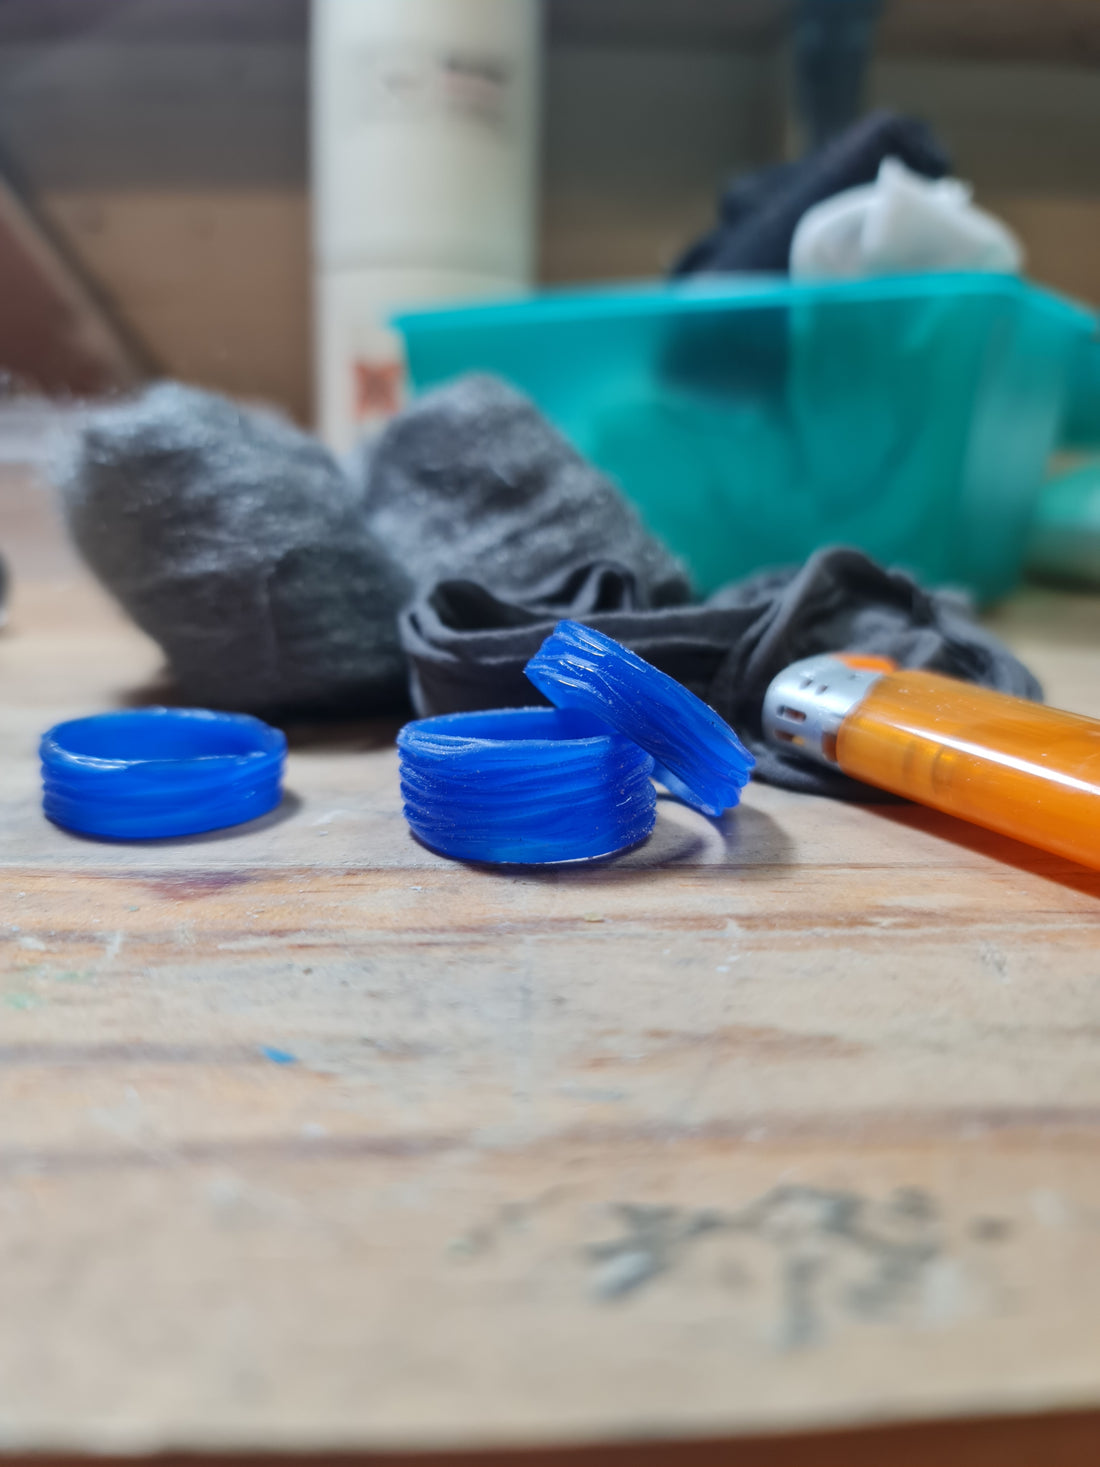 Wax carving tools and blue jewellers wax sitting on a jewellers bench ready to start work on in Kara Jewellery by Charlotte's workshop